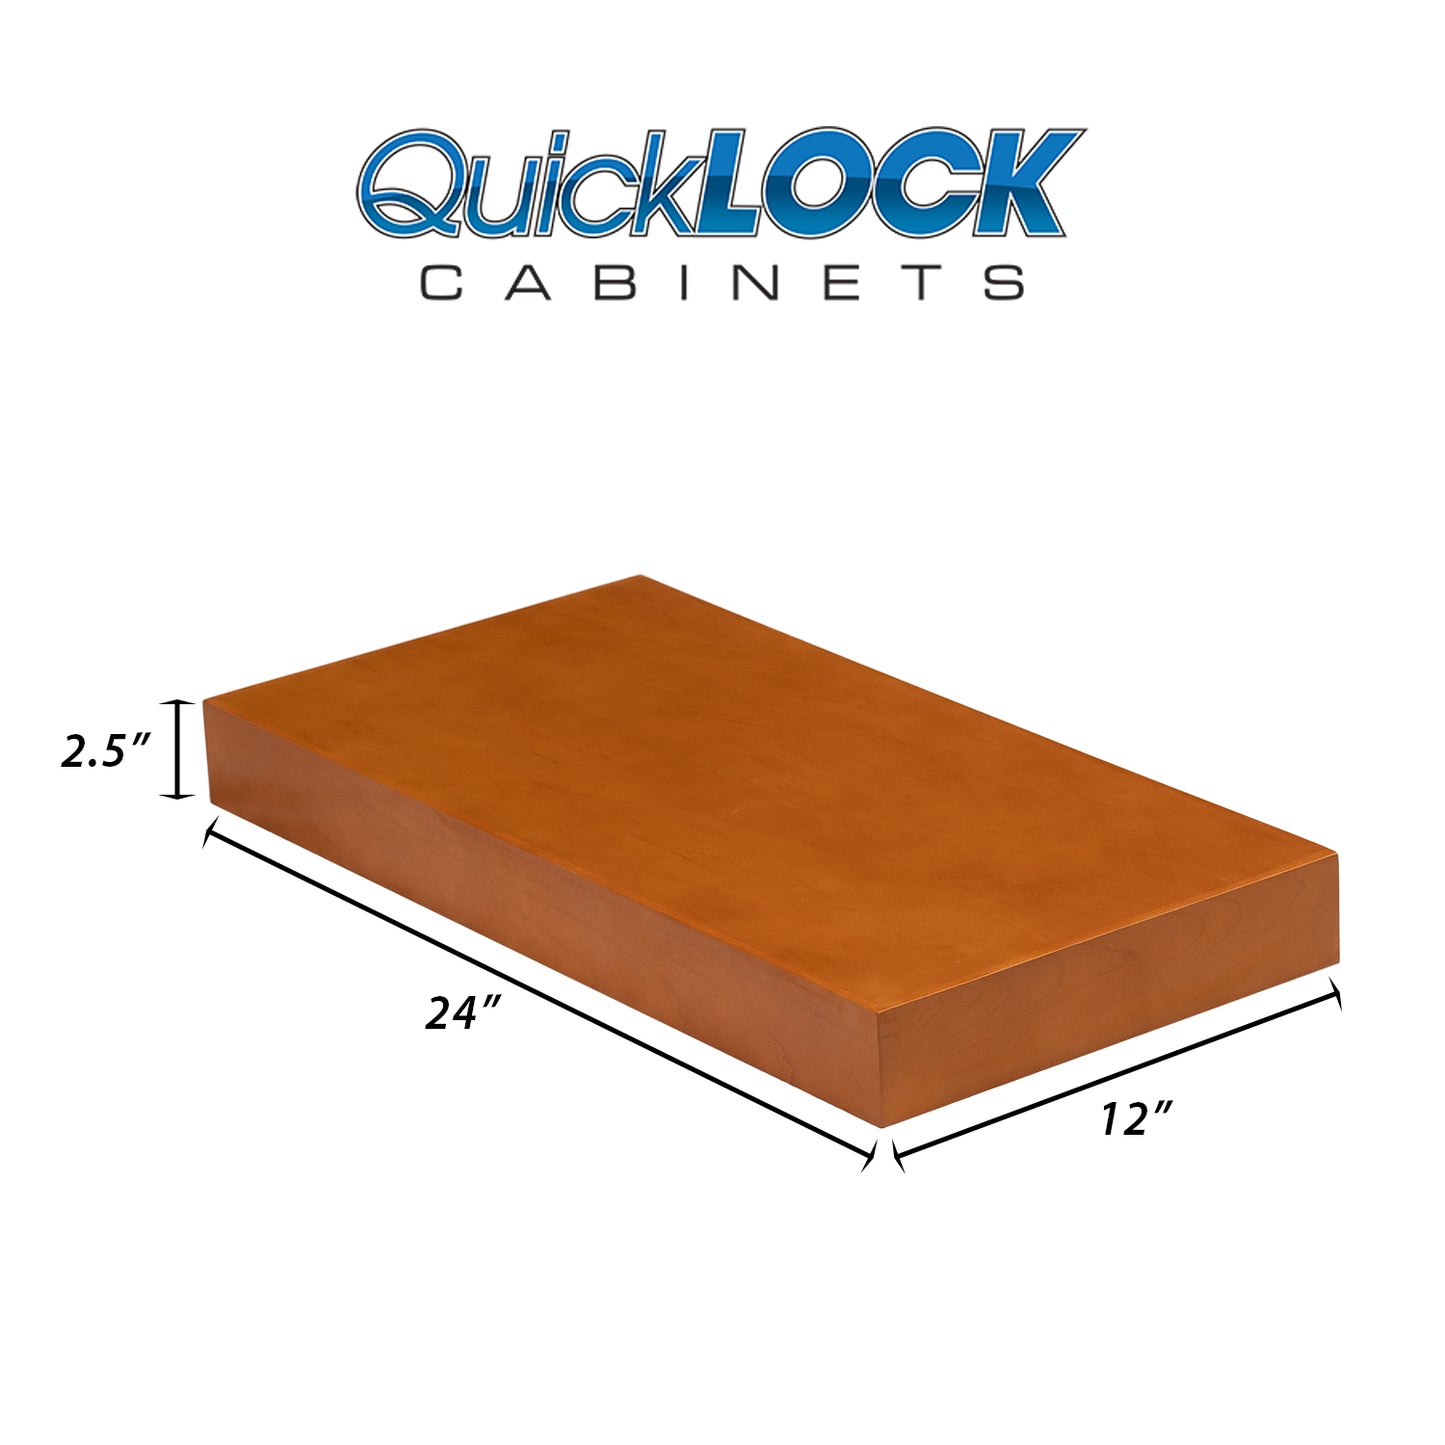 Quicklock Cabinets Floating Shelves | 2.5" Thick | Provincial Stain, 12" D x 24" W x 2.5" H | American Made | Hardwood Bracket | Complete Shelf Unit